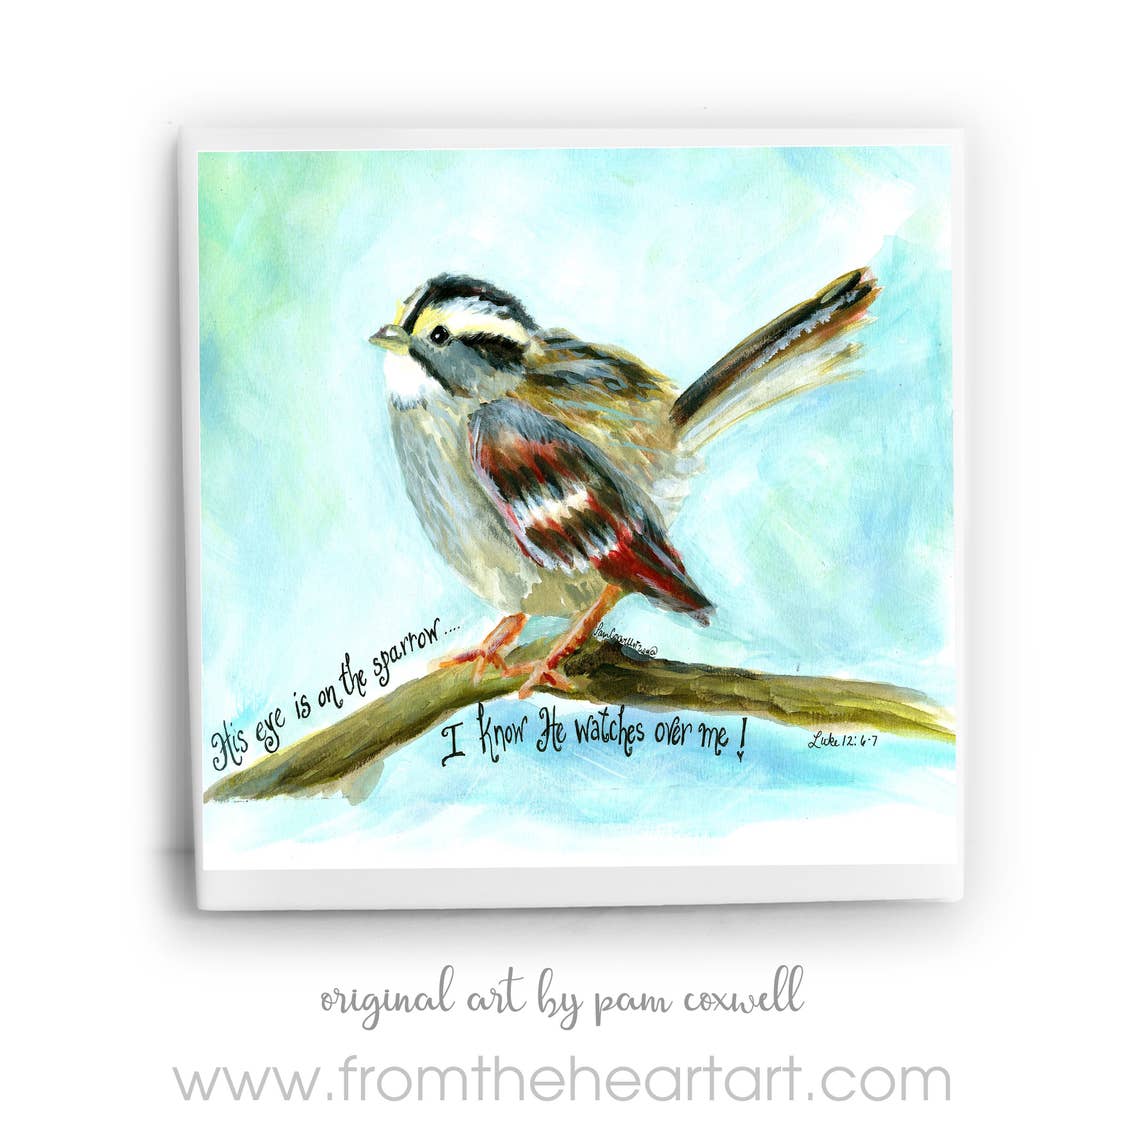 Blue Sparrow Ceramic Tile by Pam Coxwell